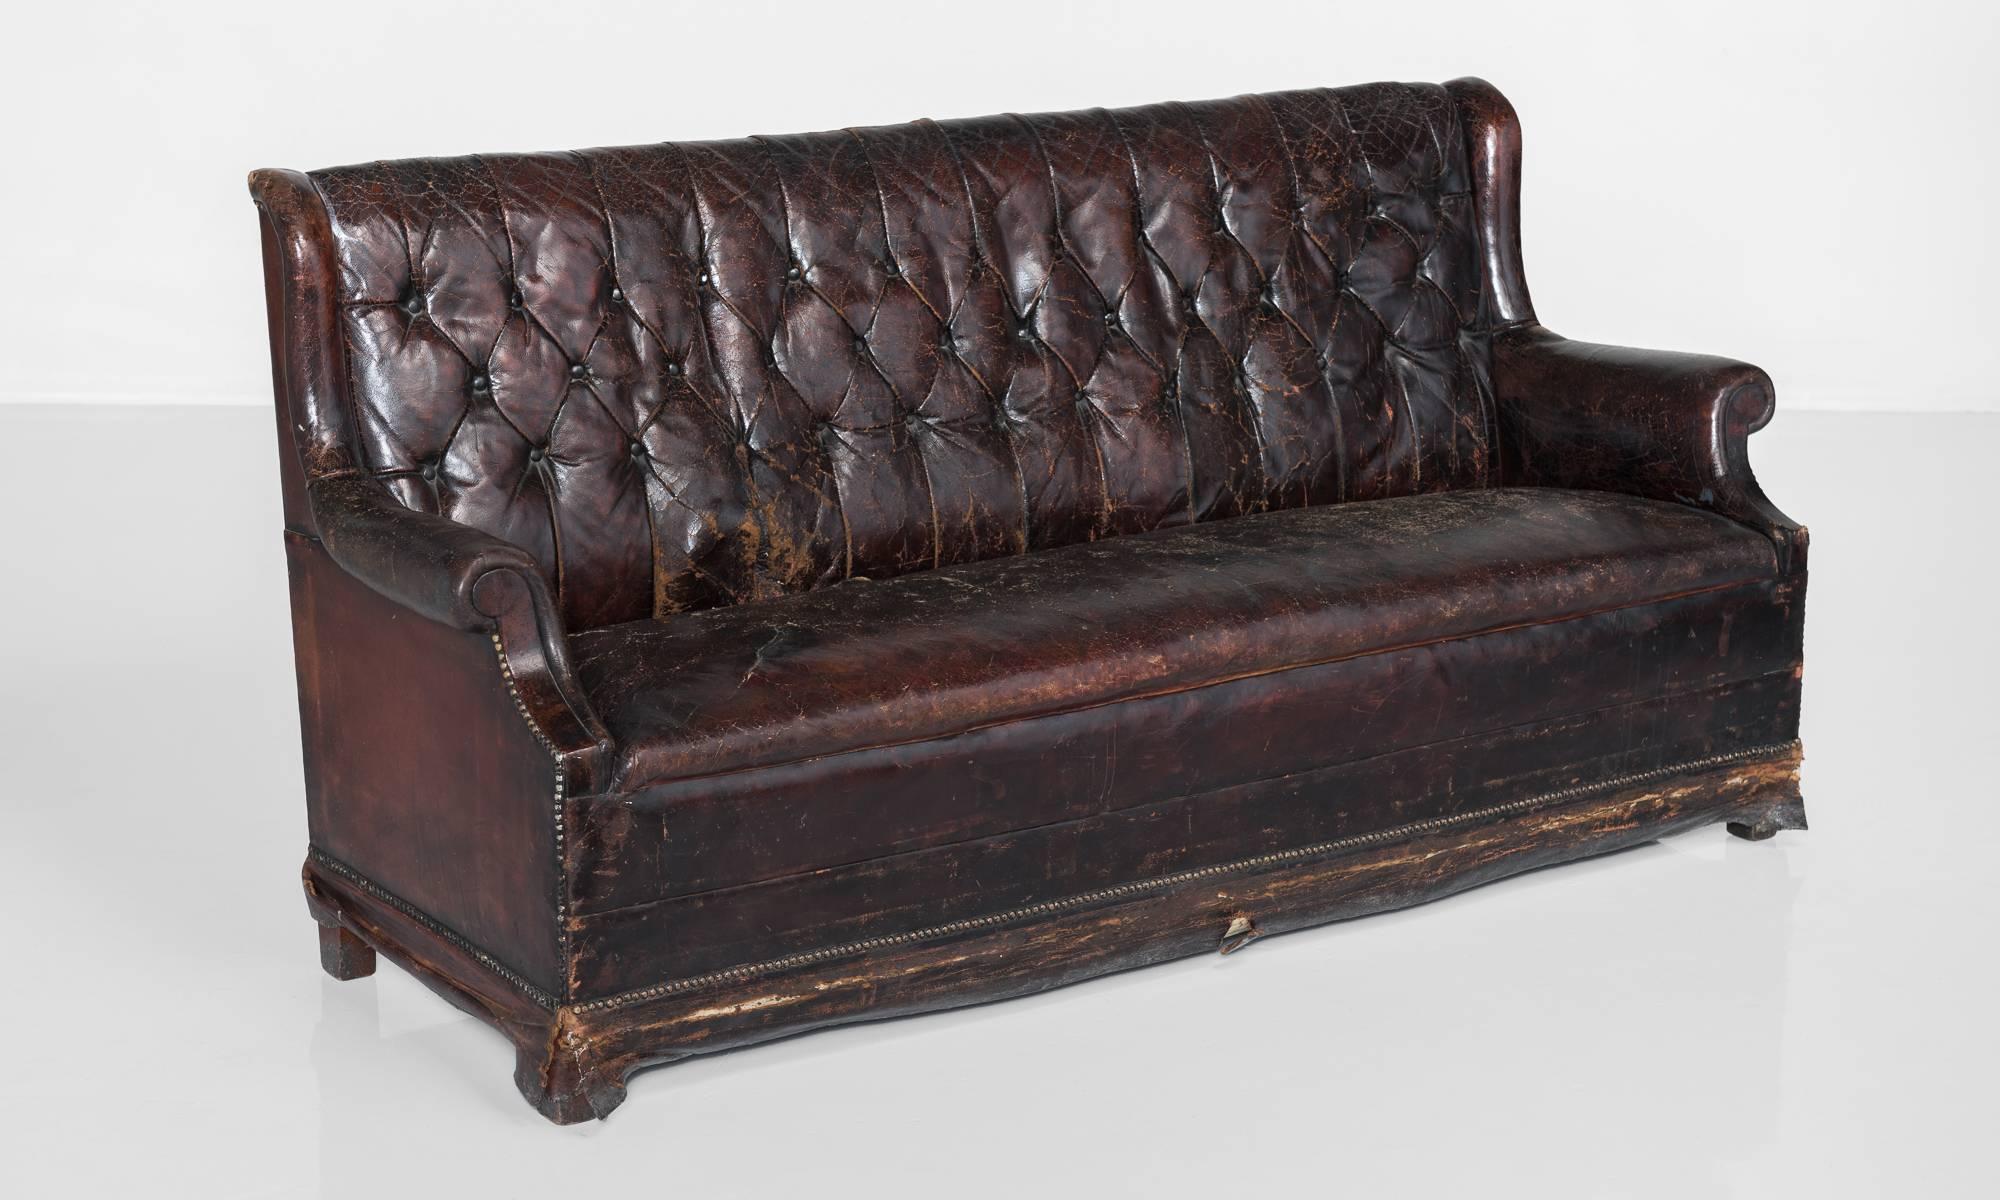 Brass studded leather club sofa, England, circa 1860.

Dark leather upholstery with roll over arms on block feet.

Measures: 75.25